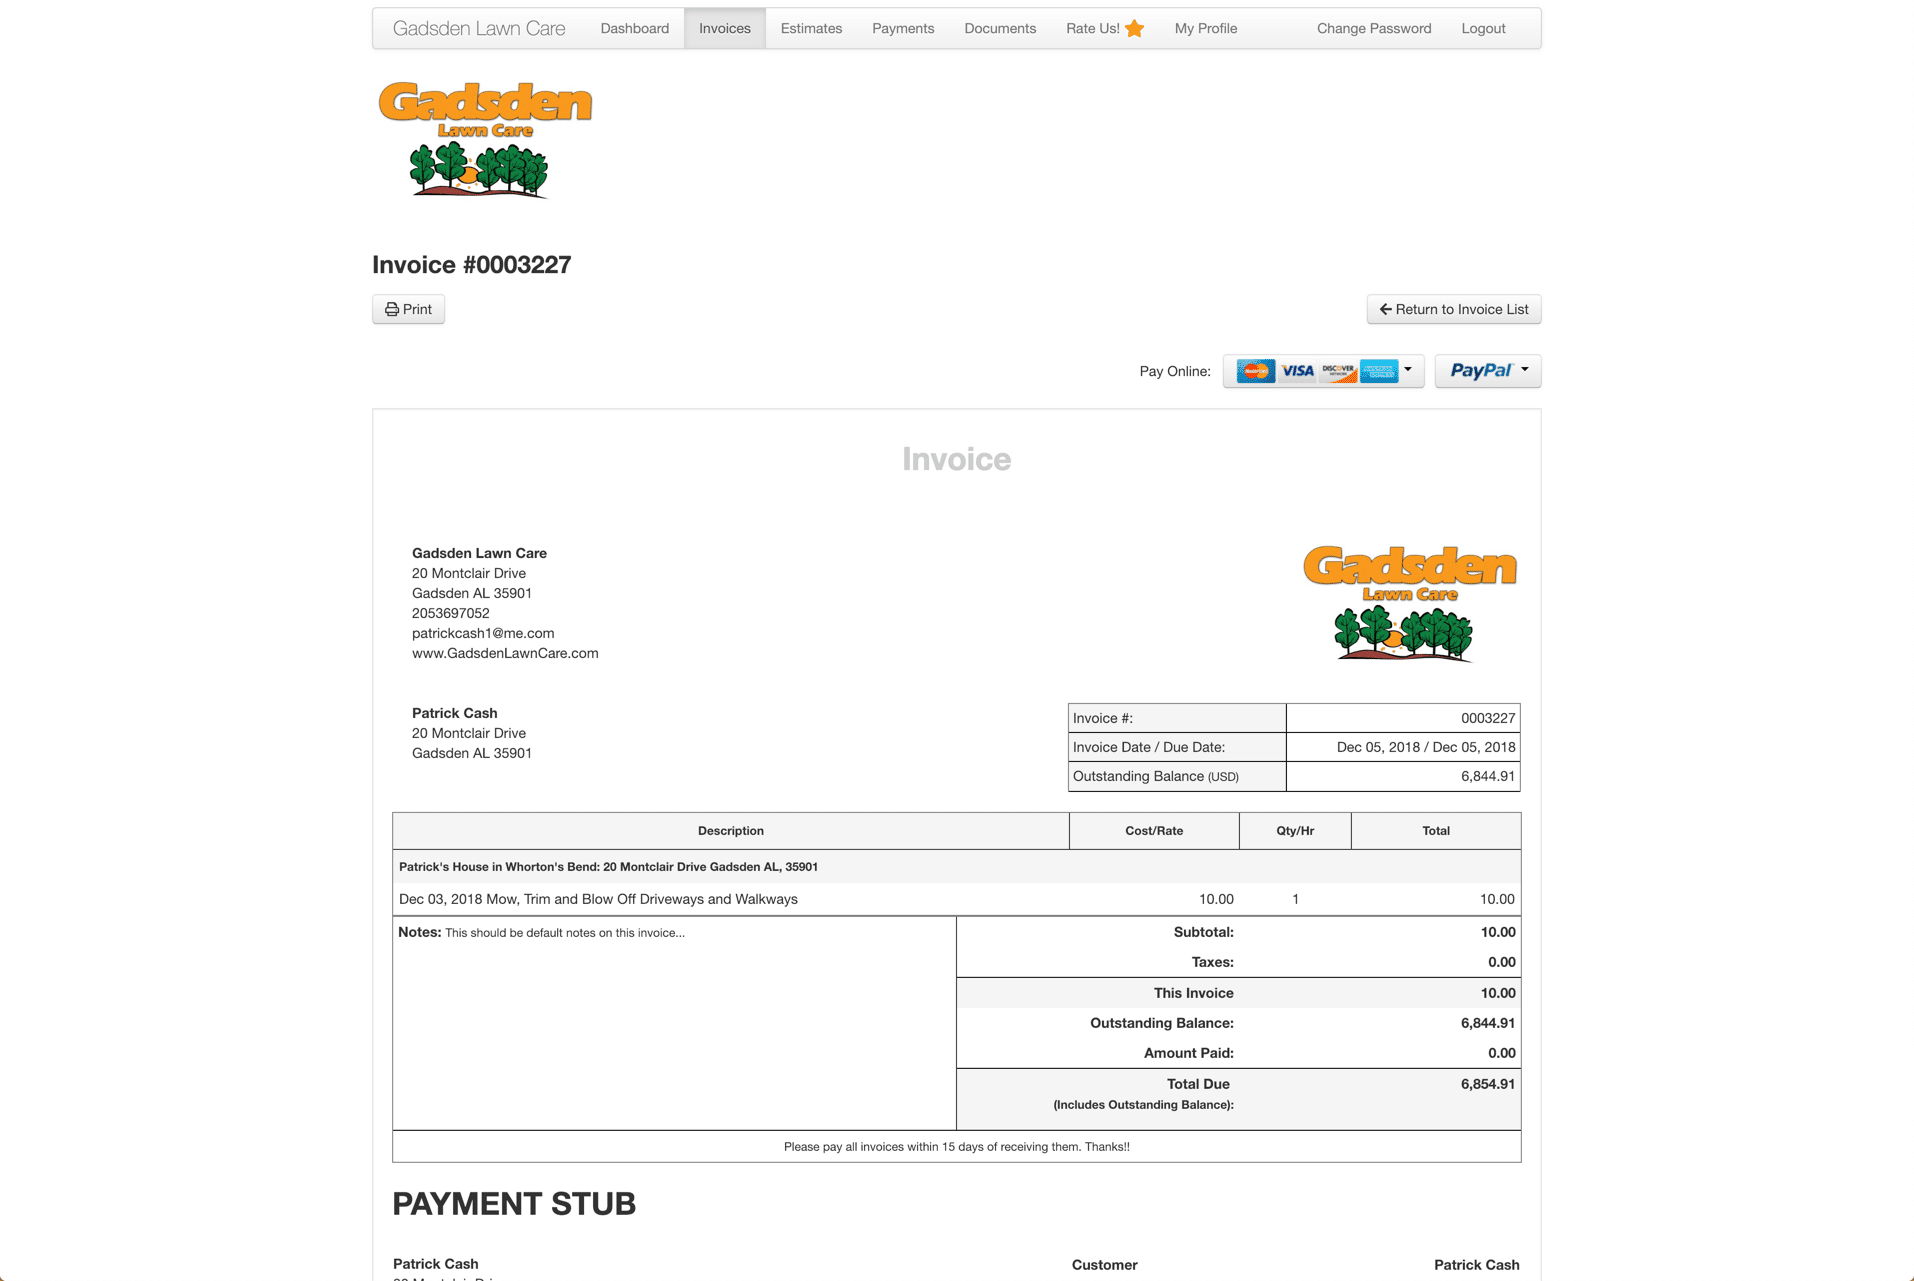 CLient portal for paying invoices and requesting work.